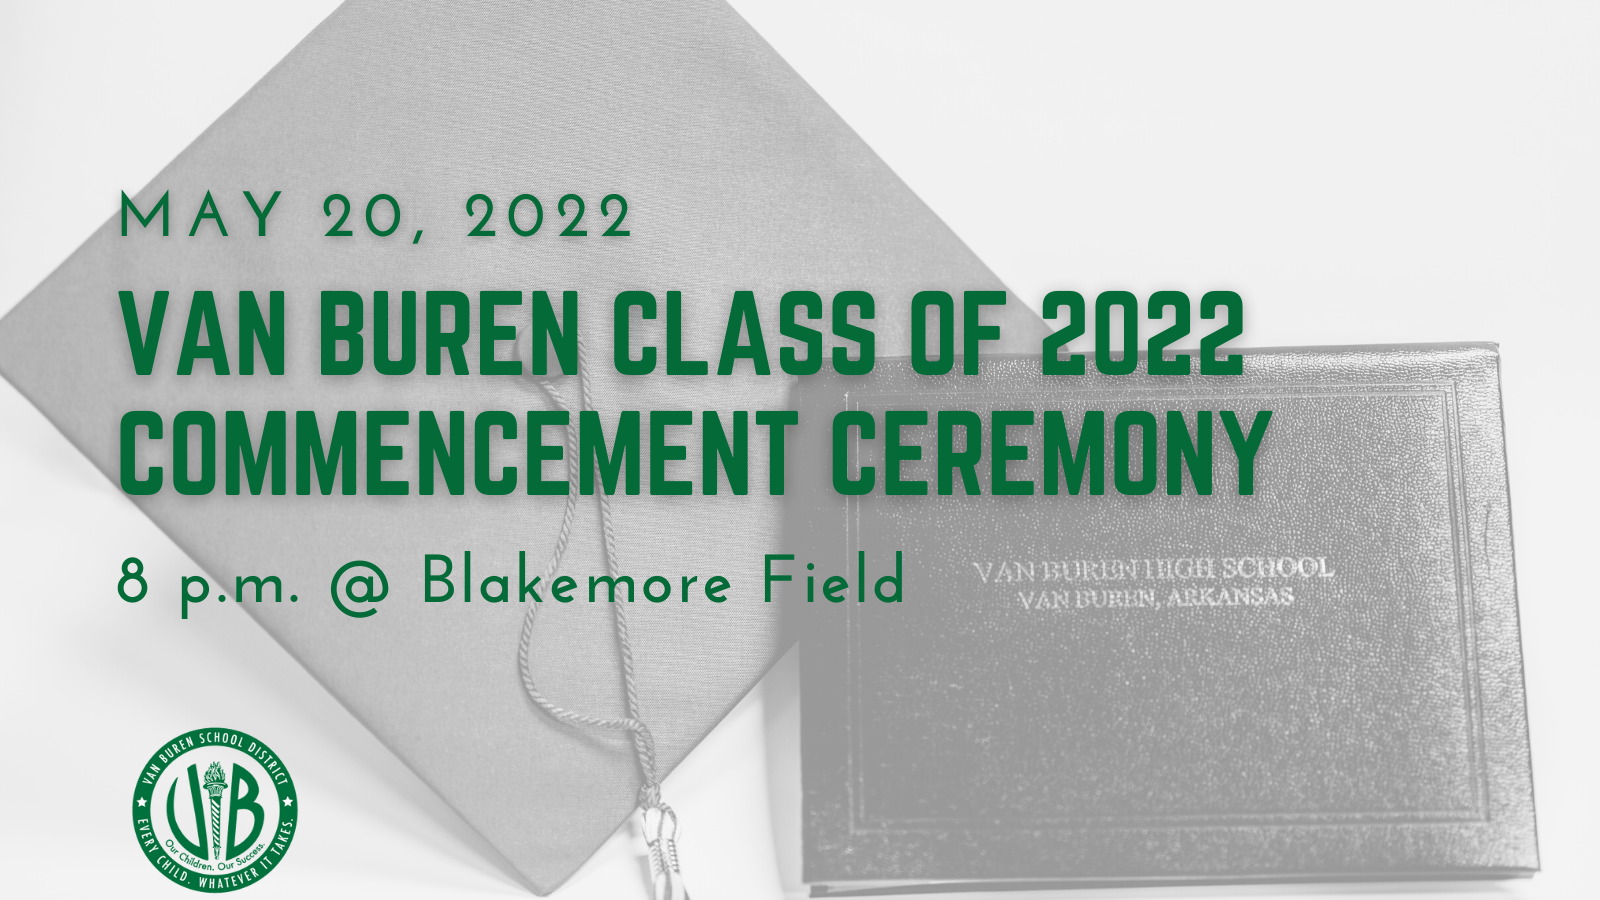 VBHS Commencement Ceremony to be held Friday, May 20